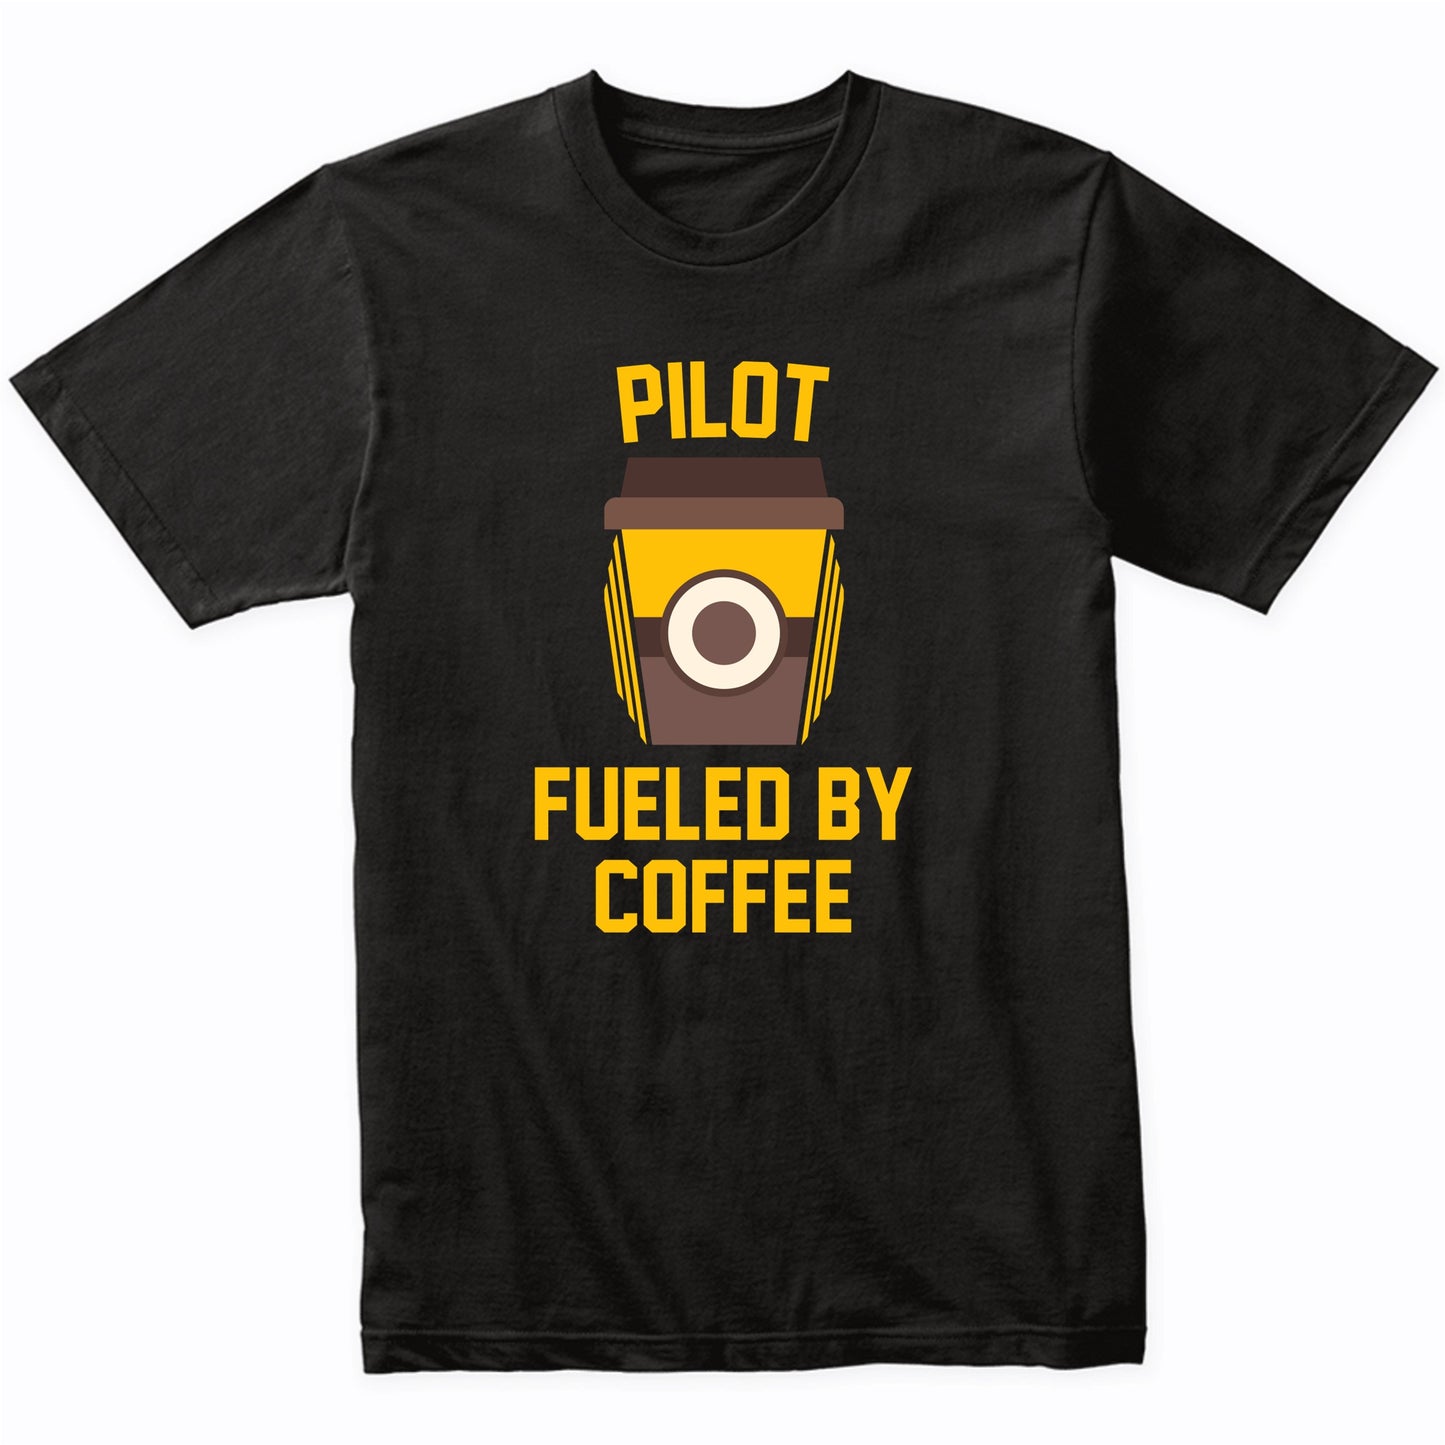 Pilot Fueled By Coffee Funny Shirt